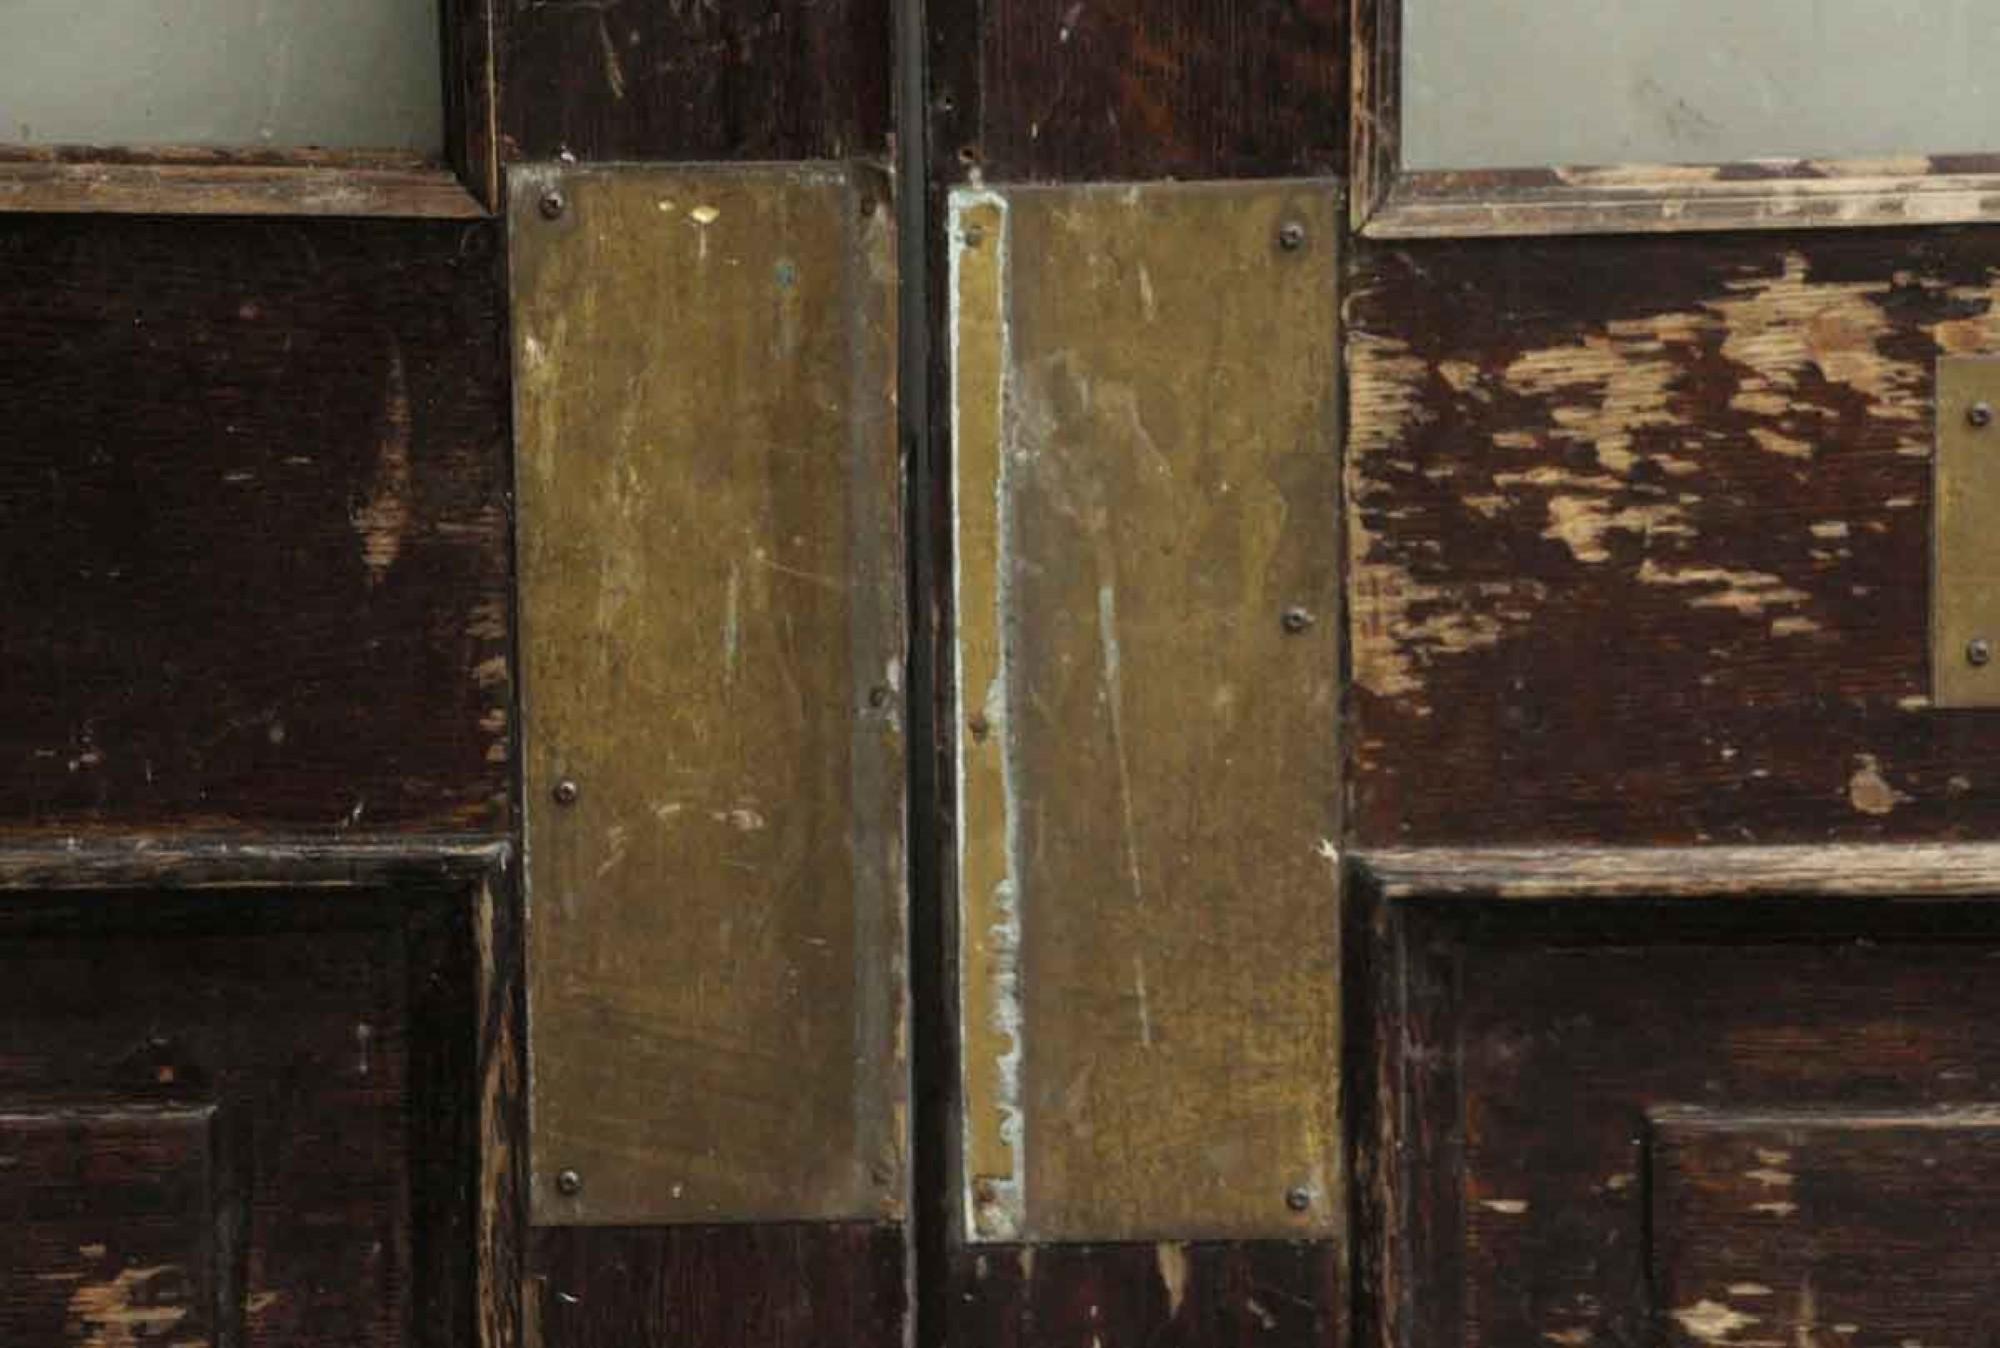 Large 1890s dark wood tone brownstone doors with one vertical center glass panel, two bottom wooden panels and brass kick plates. The opposite side of the doors have one push bar. Priced as a pair. Measures: 100.5 in. H x 60 in. W.